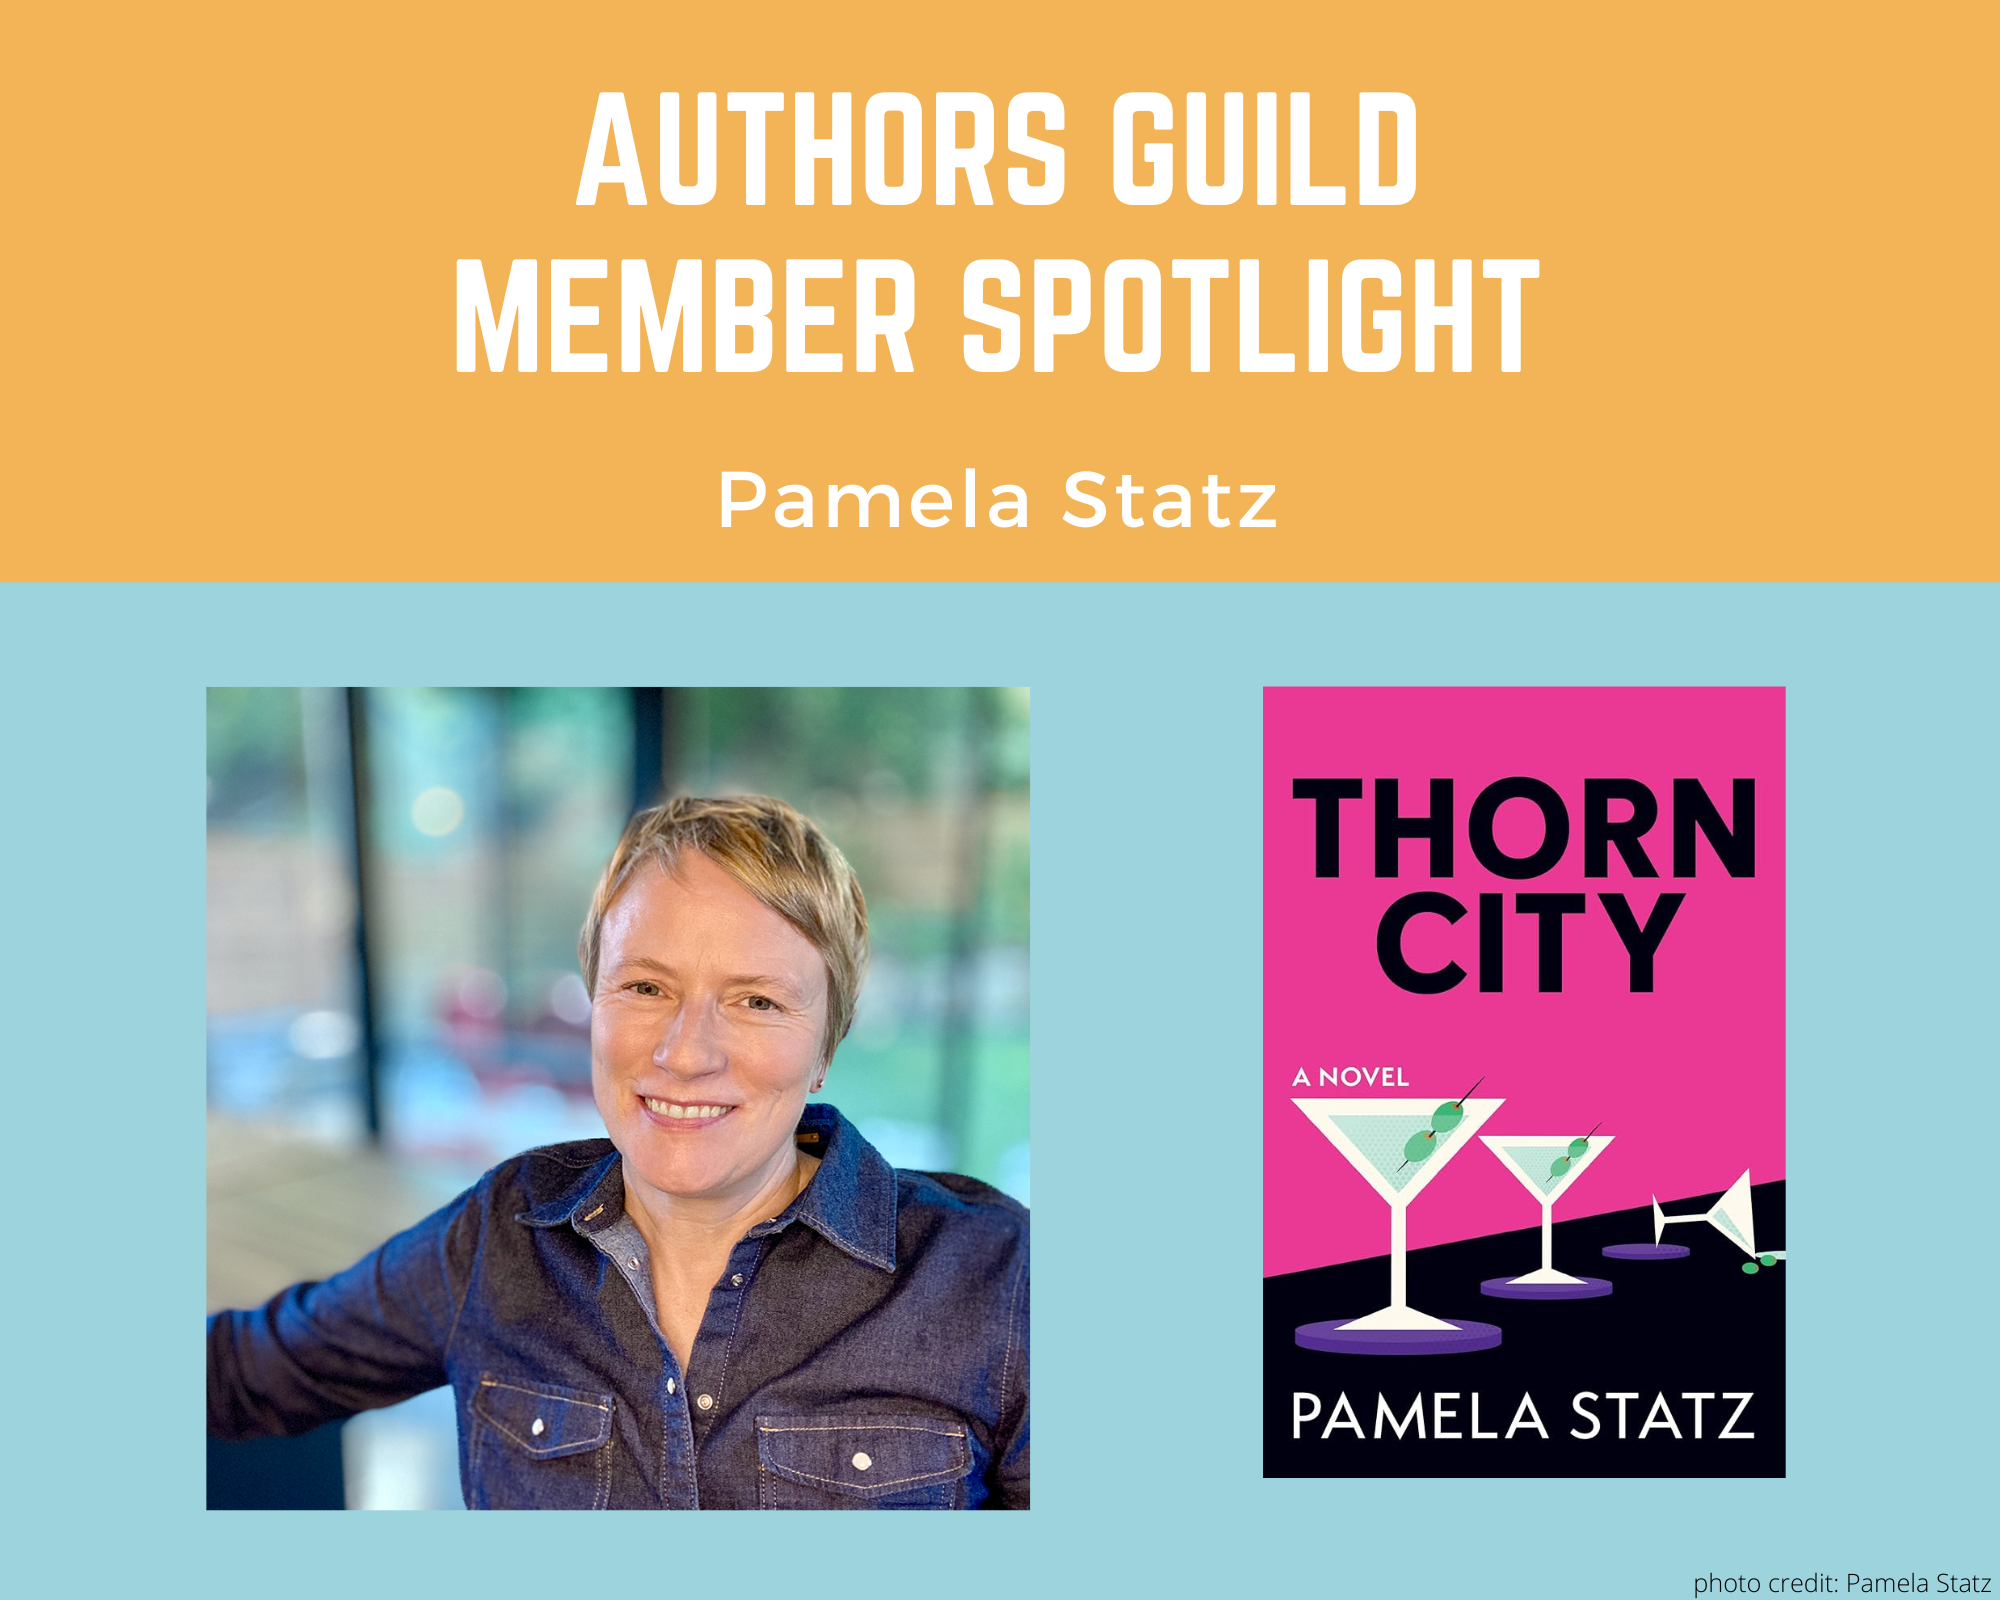 author Pamela Statz and an image of her book Thorn City